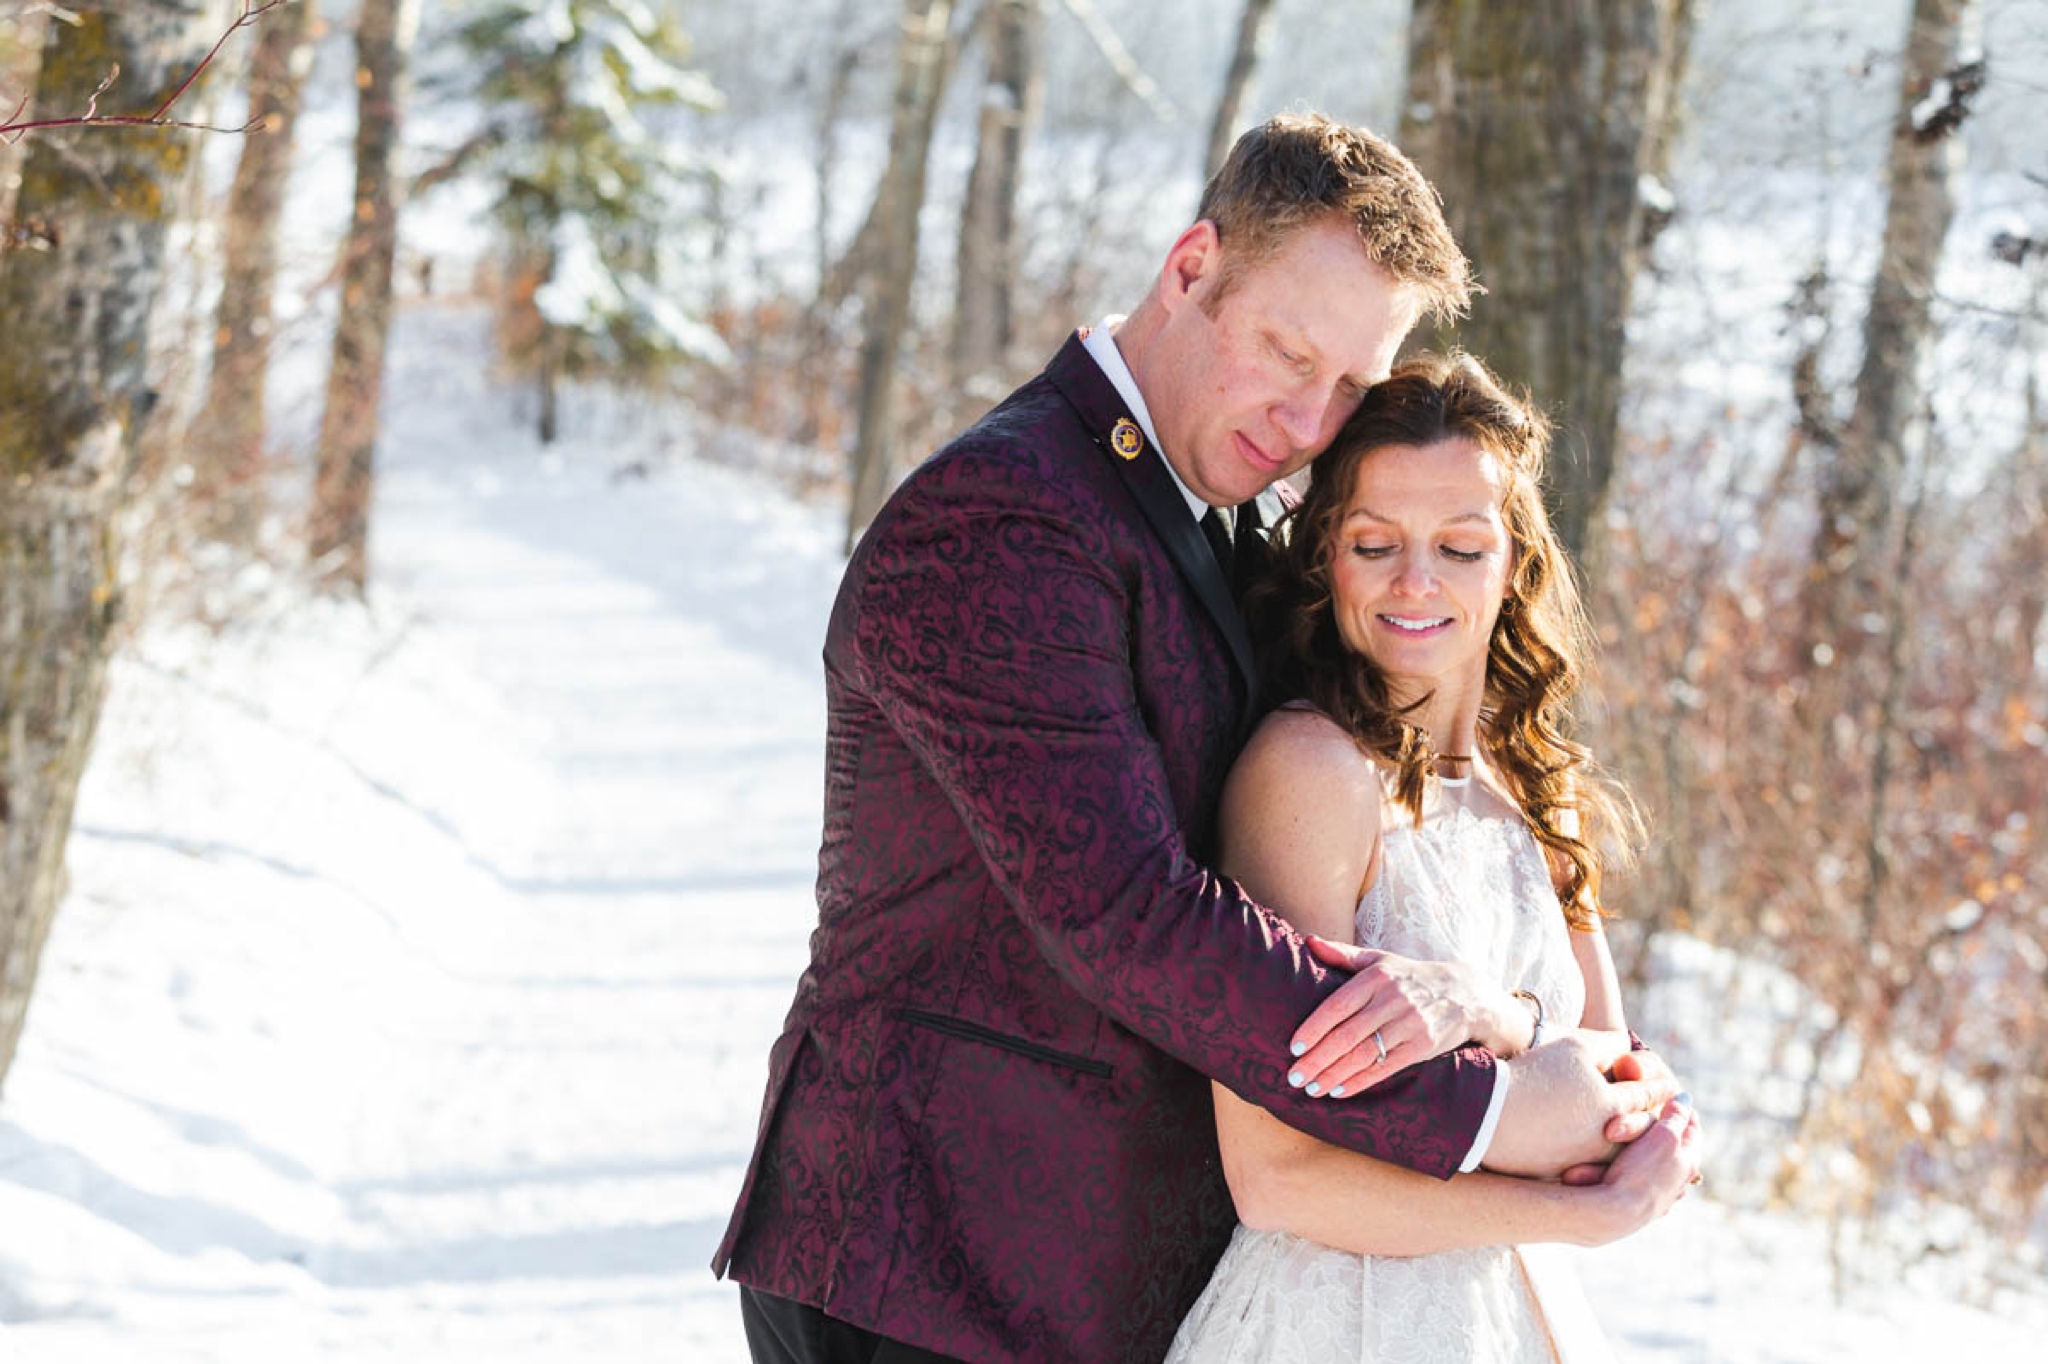 Wedding couple embracing for a photo with snowy landscape